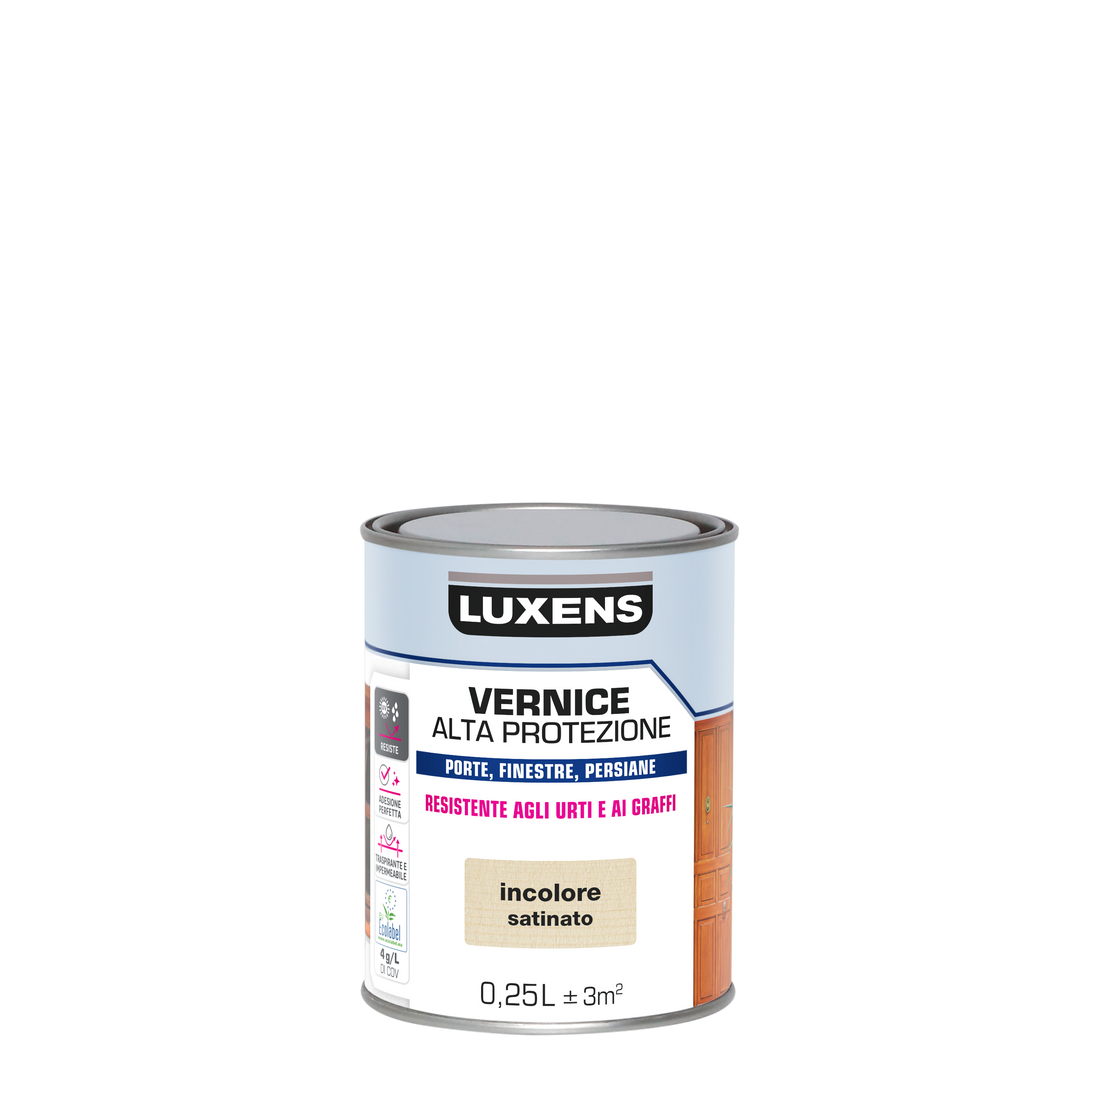 LUXENS HIGH-PROTECTION COLOURLESS SATIN-FINISH WATER-BASED WOOD VARNISH 250 ML